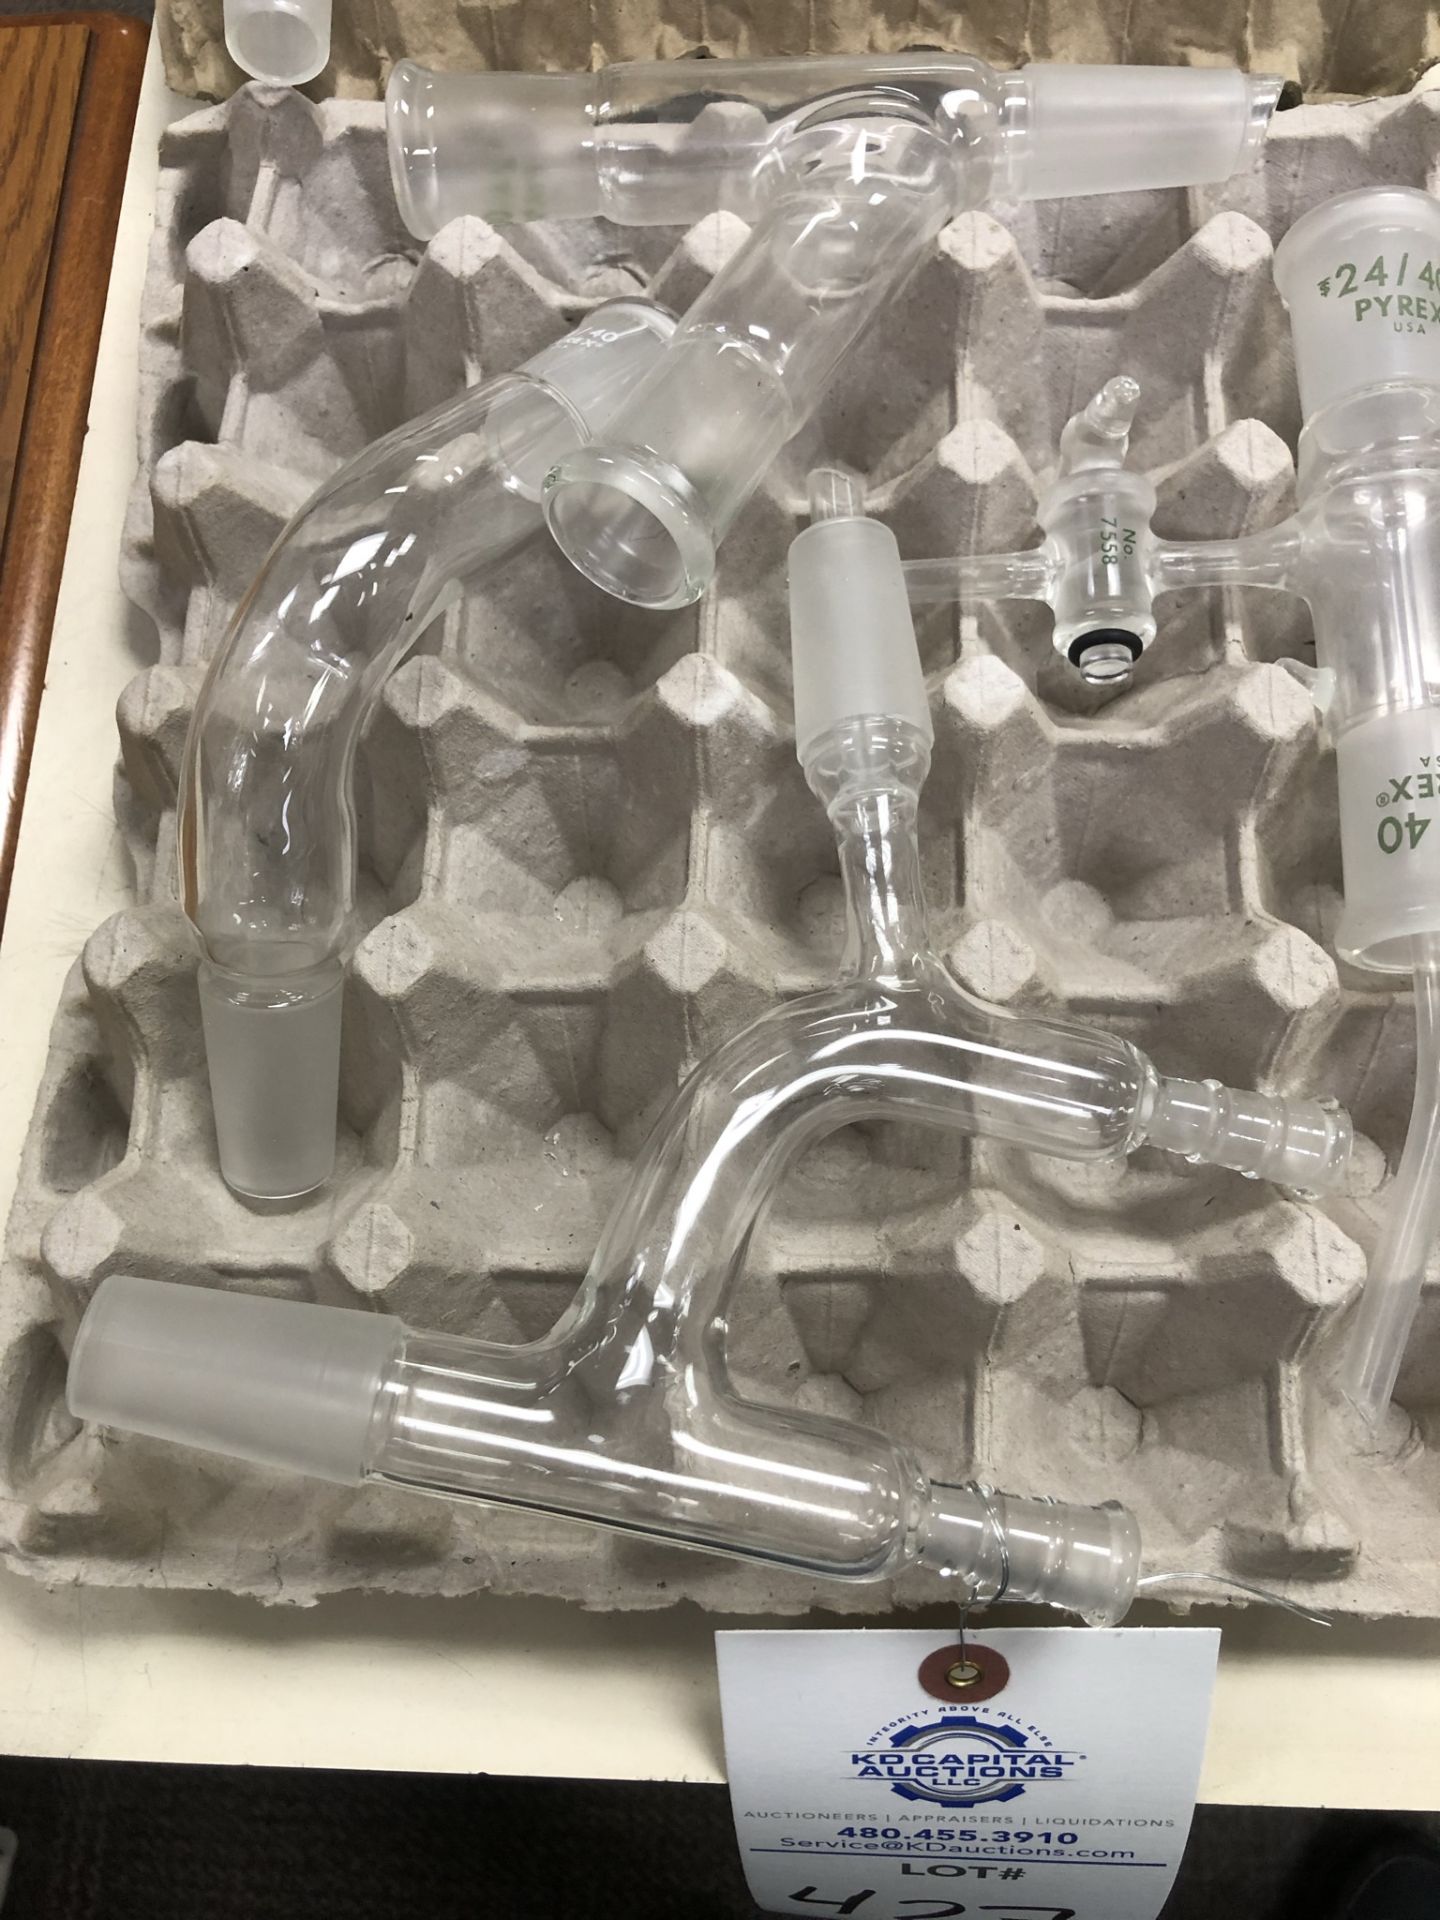 Lot of Misc. Glassware Mostly 24/40 Distillation Components - Image 2 of 7